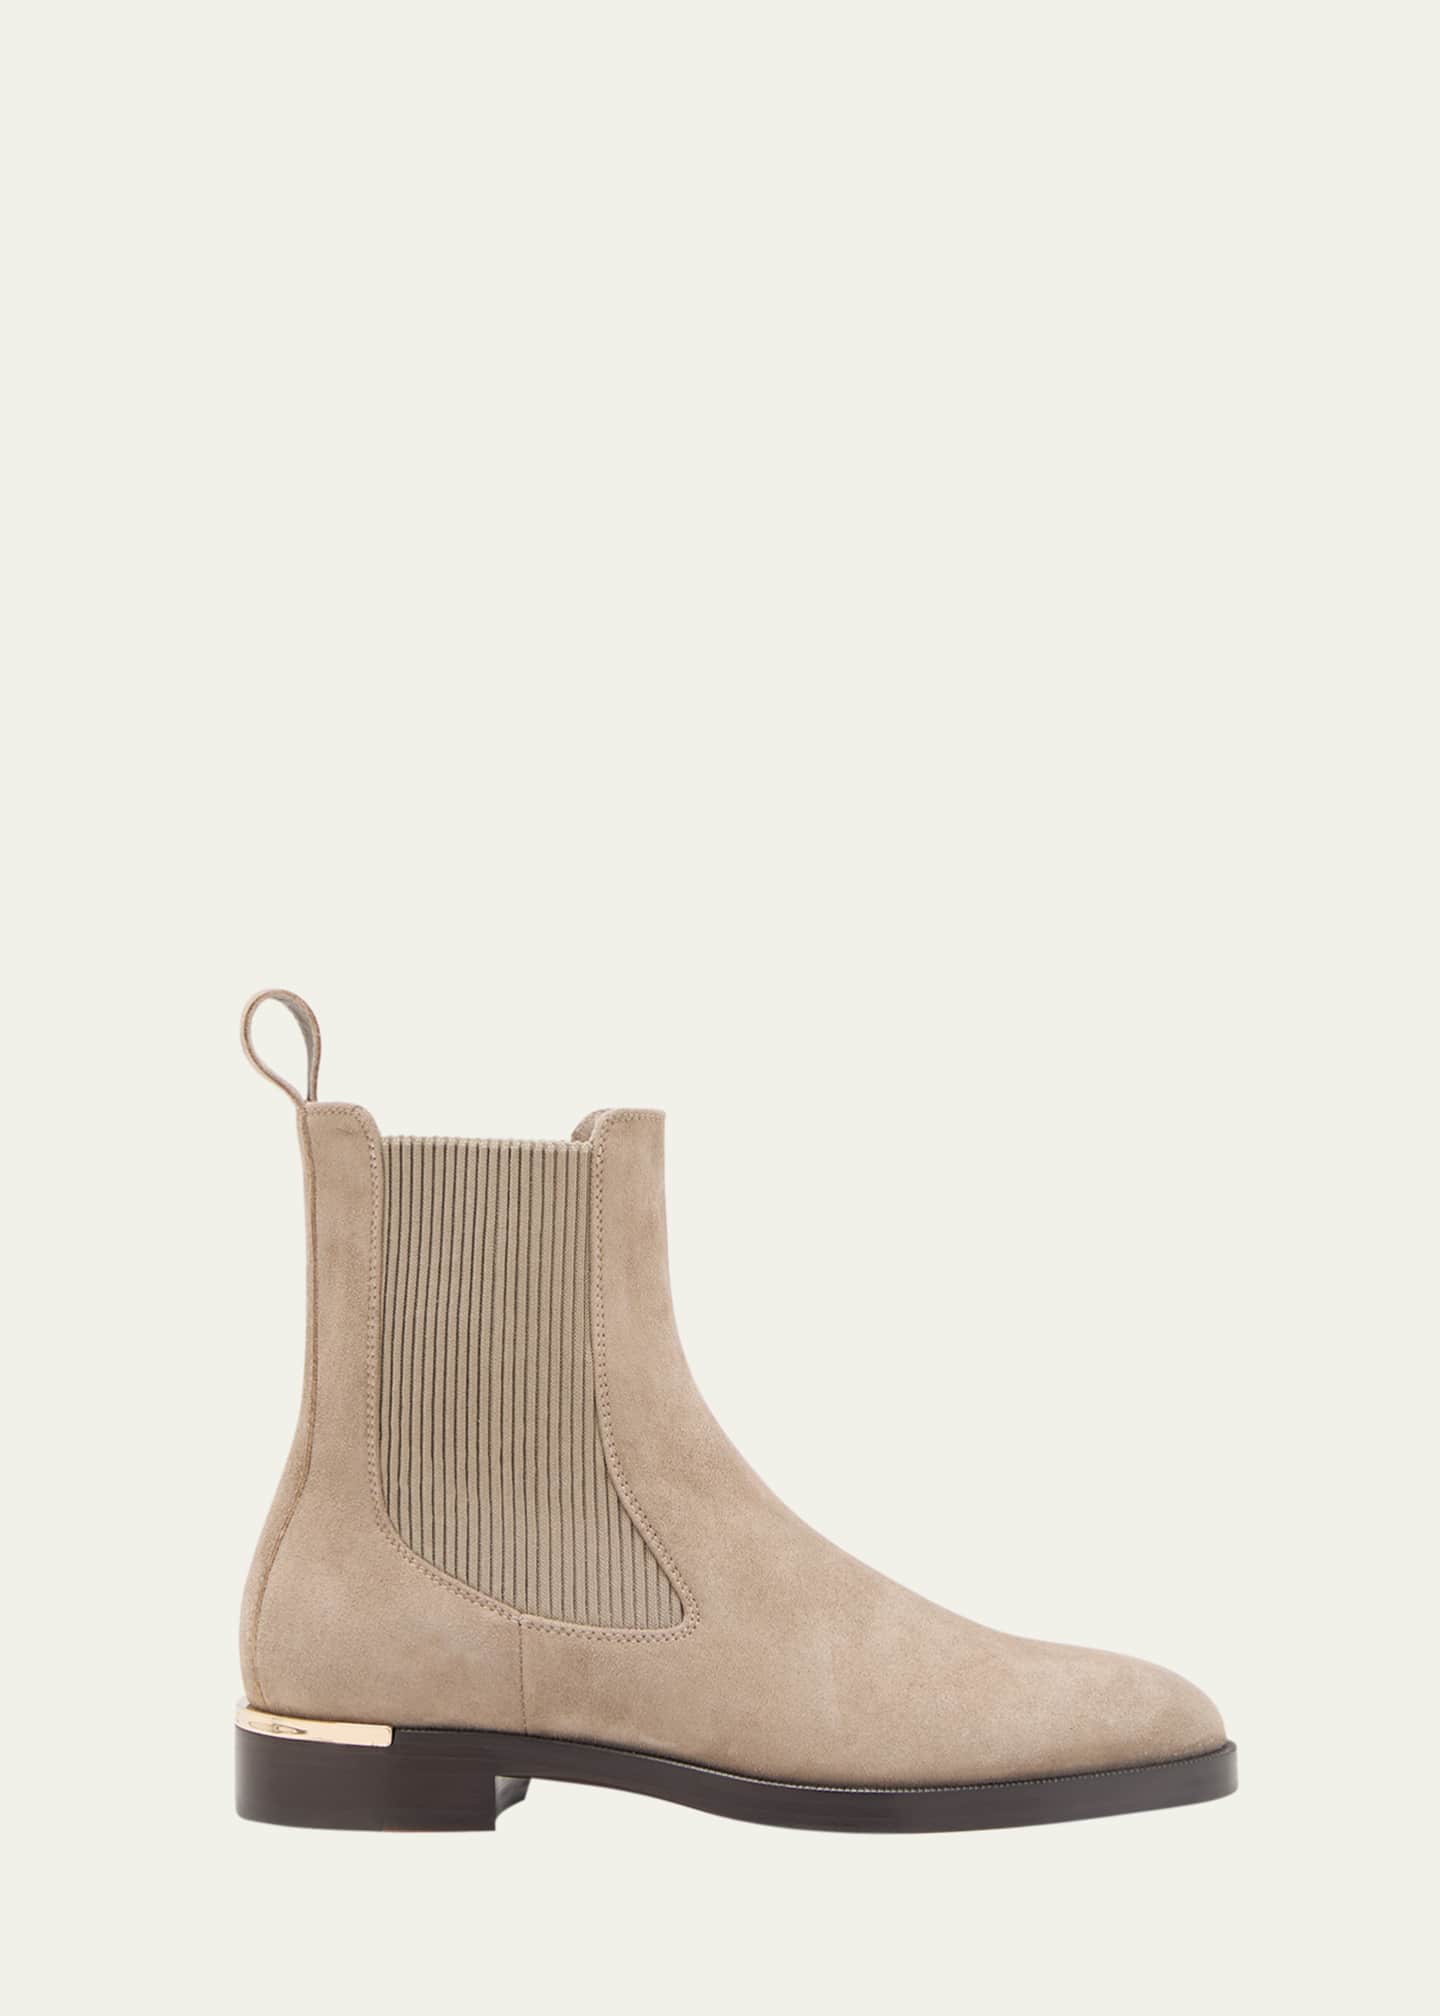 Jimmy Choo Thessaly Suede Chelsea Ankle Boots - Bergdorf Goodman